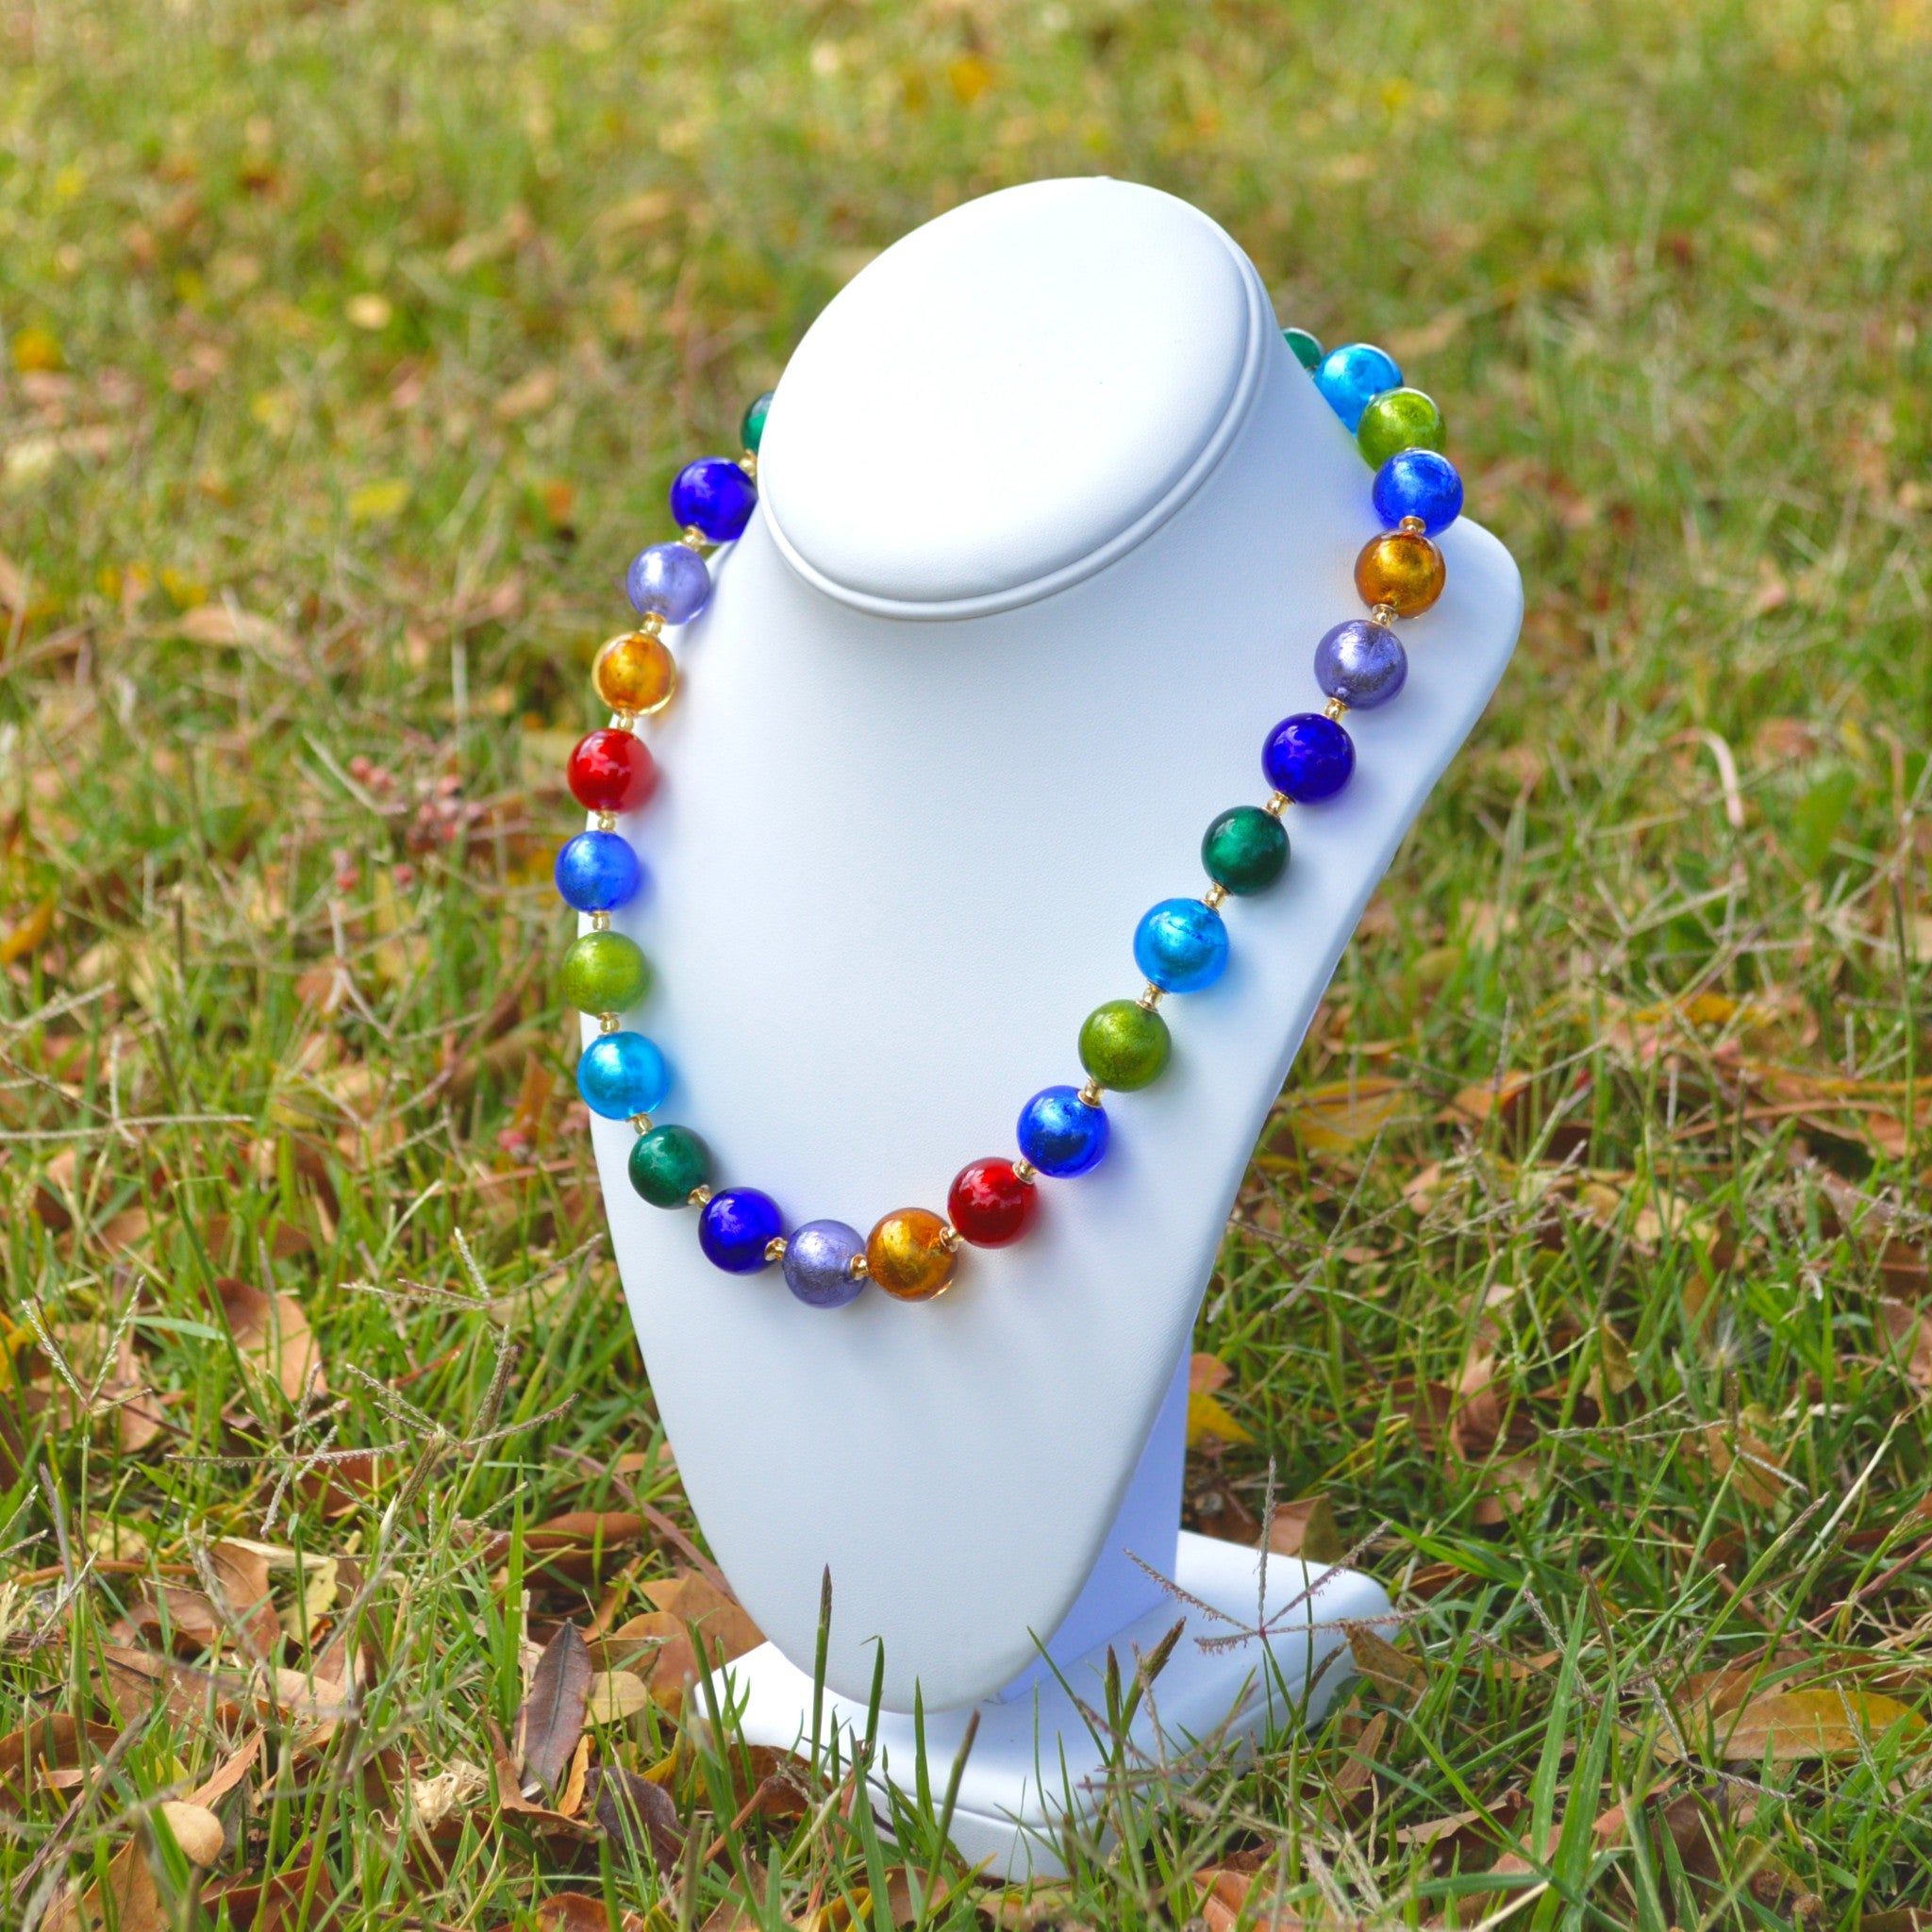 Diva Murano Glass Beaded Necklace, Multi-Color Glass Beads, Handcrafted in Italy